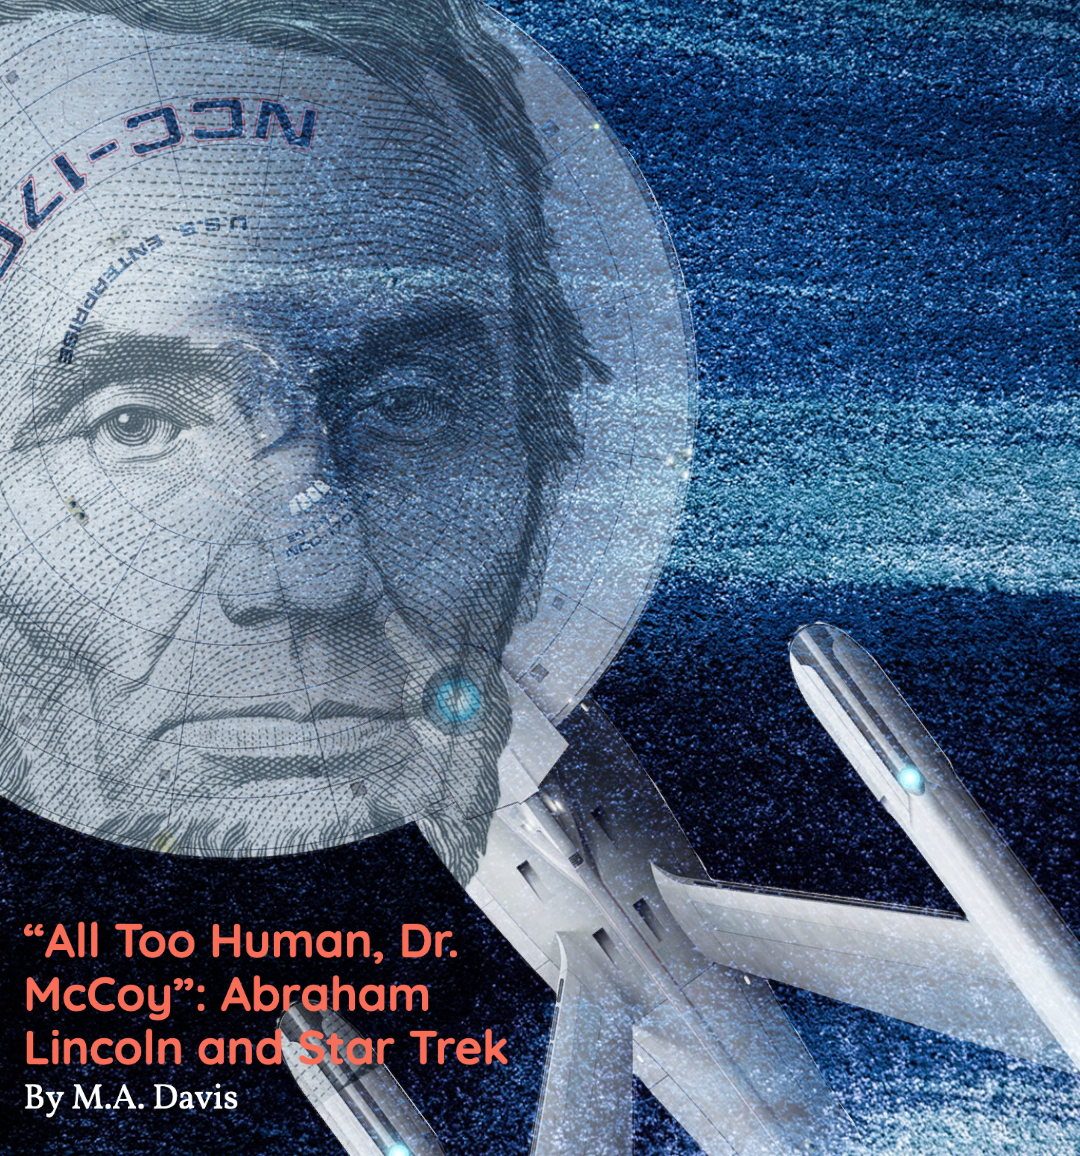 “All Too Human, Dr. McCoy”: Abraham Lincoln and Star Trek